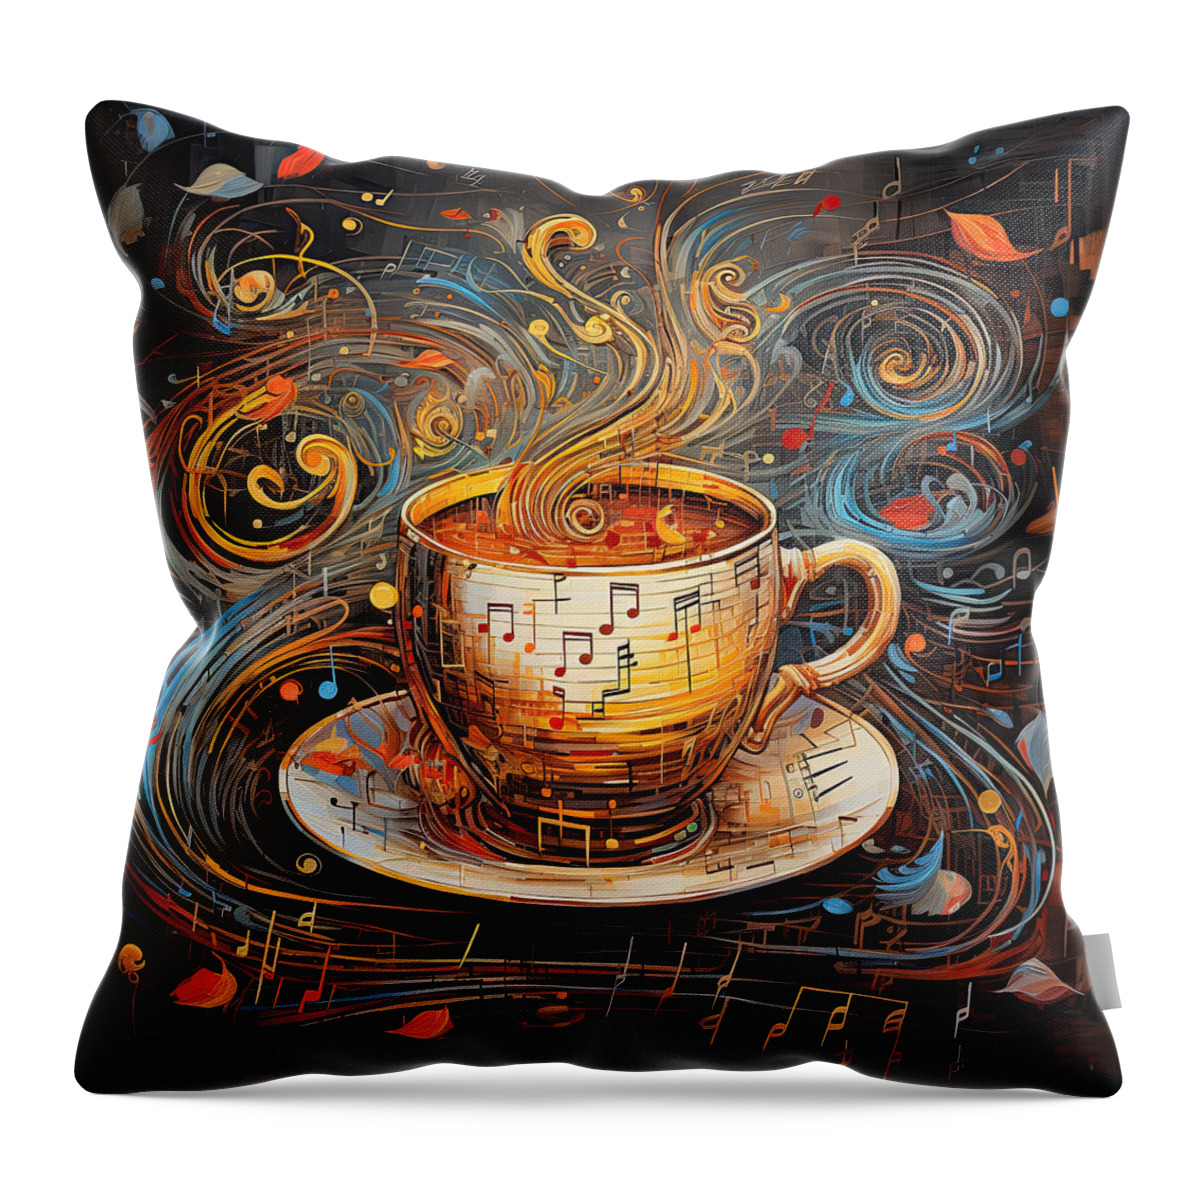 Coffee Throw Pillow featuring the digital art Coffee And Music by Lourry Legarde